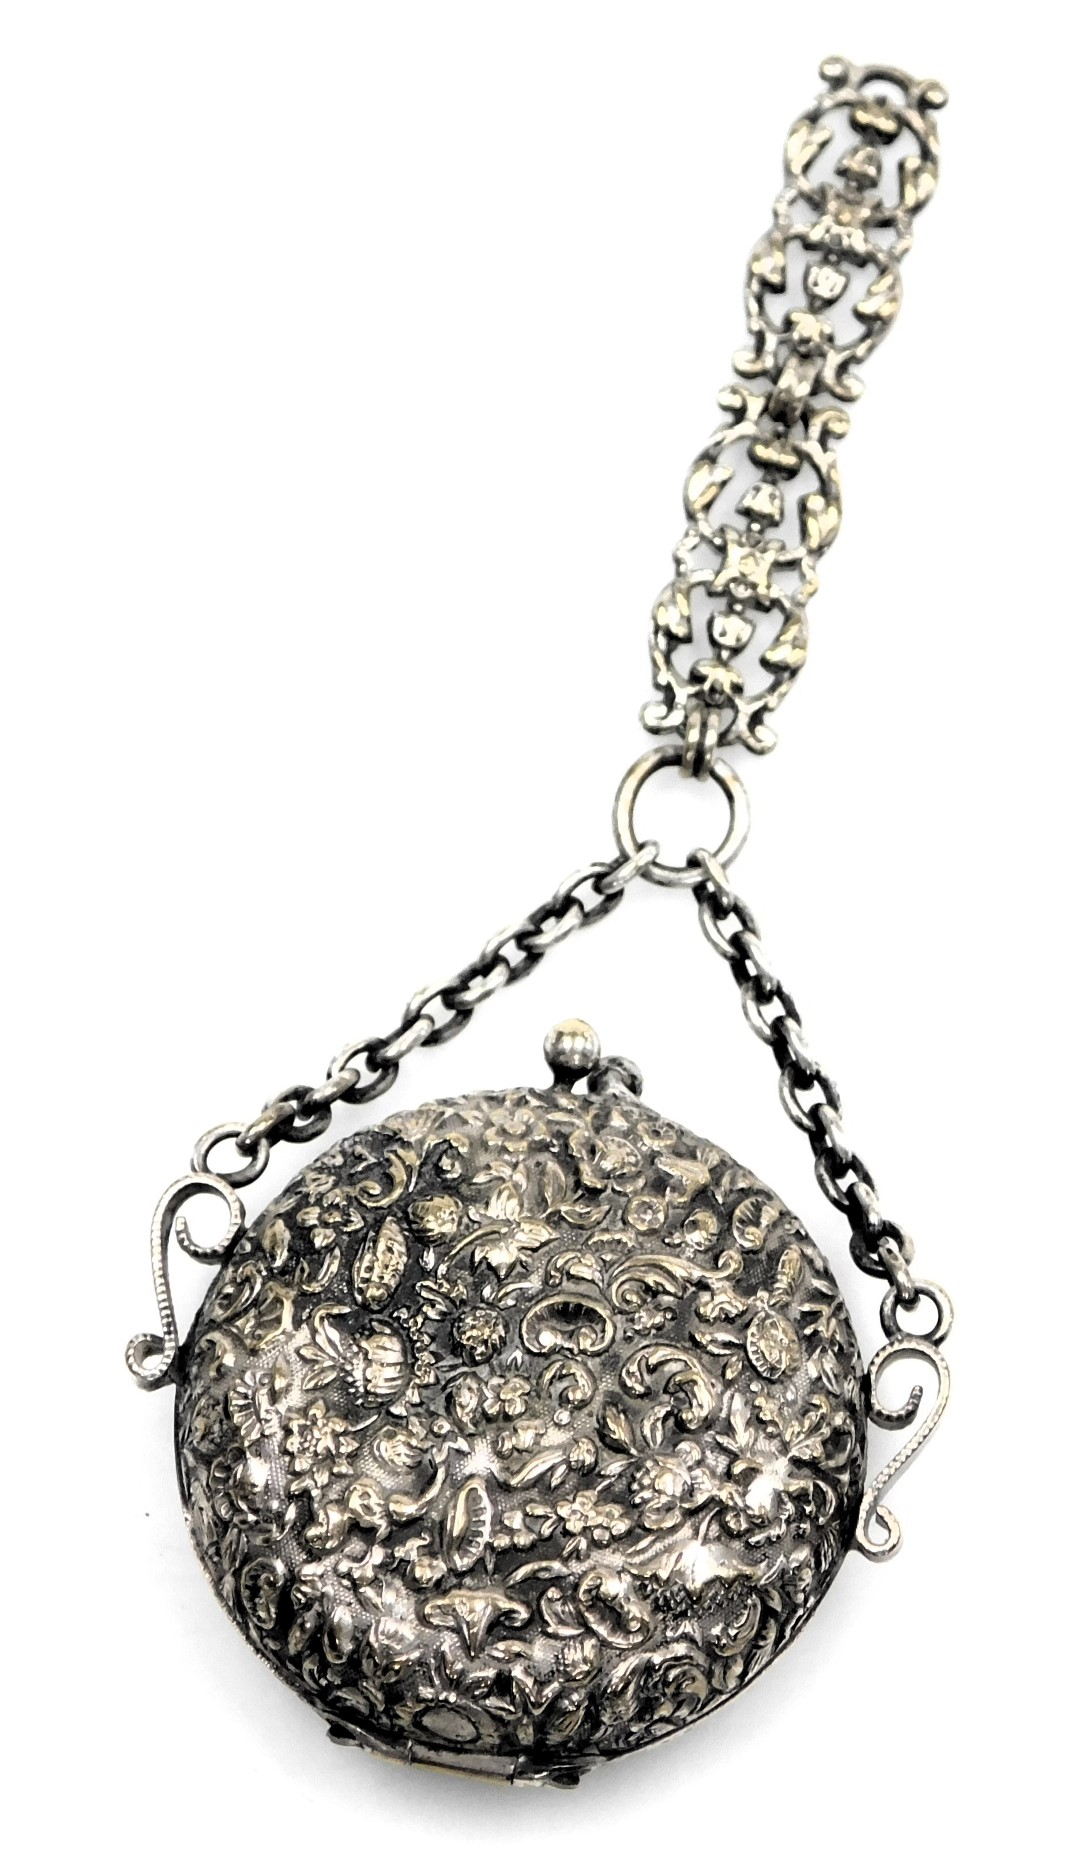 A Victorian pendant purse, possibly from a chatelaine, of white metal, circular form, embossed with